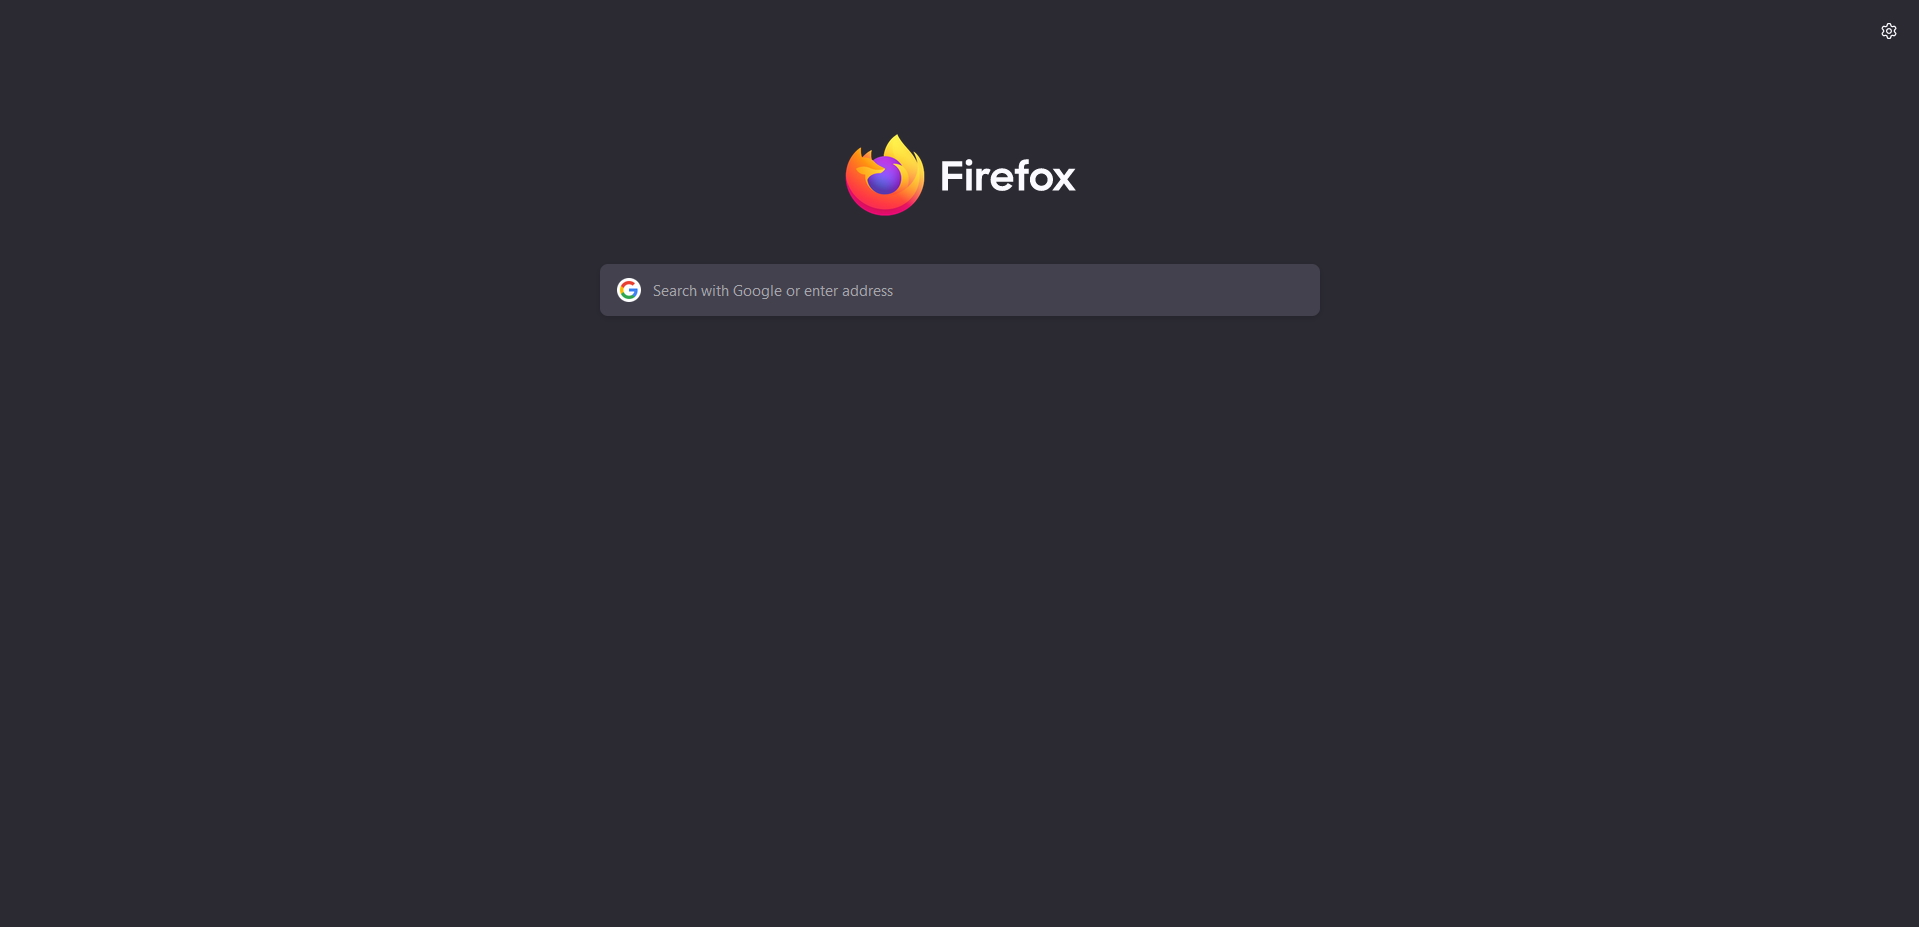 A screenshot of the Firefox "new tab" page. It is empty except for the Firefox logo, a search bar, and a tiny "settings" icon.